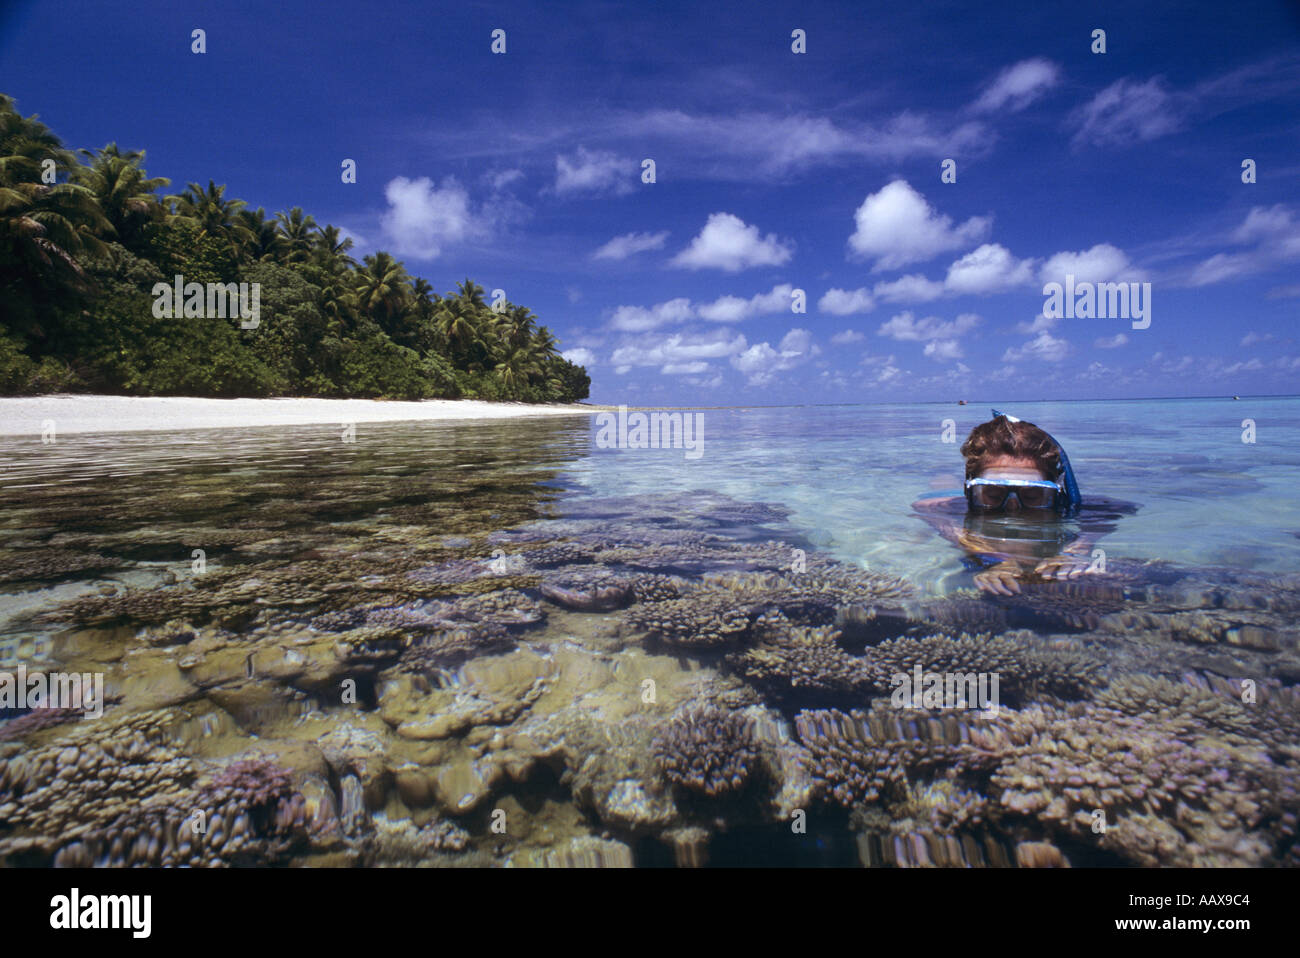 Snorkeller on shallow coral reef in the western pacific near the marshall islnds Stock Photo